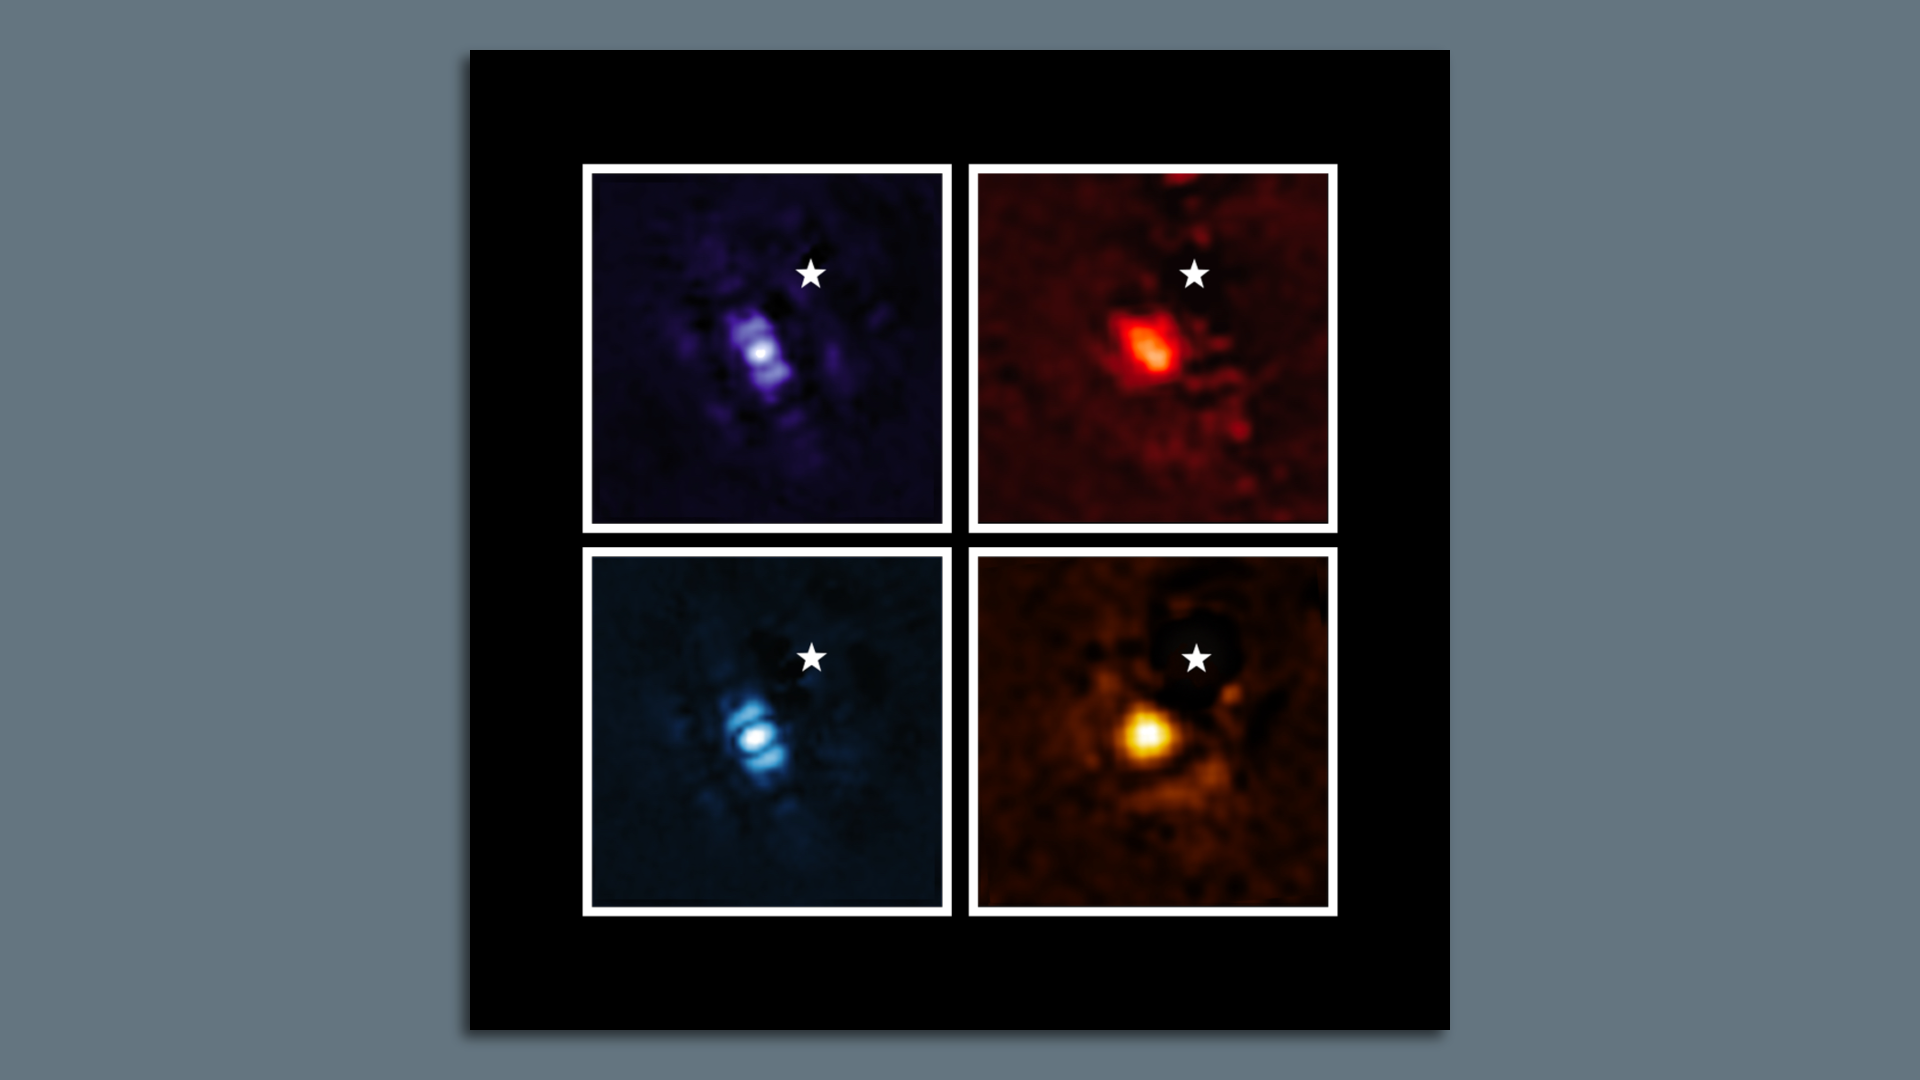 This image shows the exoplanet HIP 65426 b in different bands of infrared light, as seen from the James Webb Space Telescope: